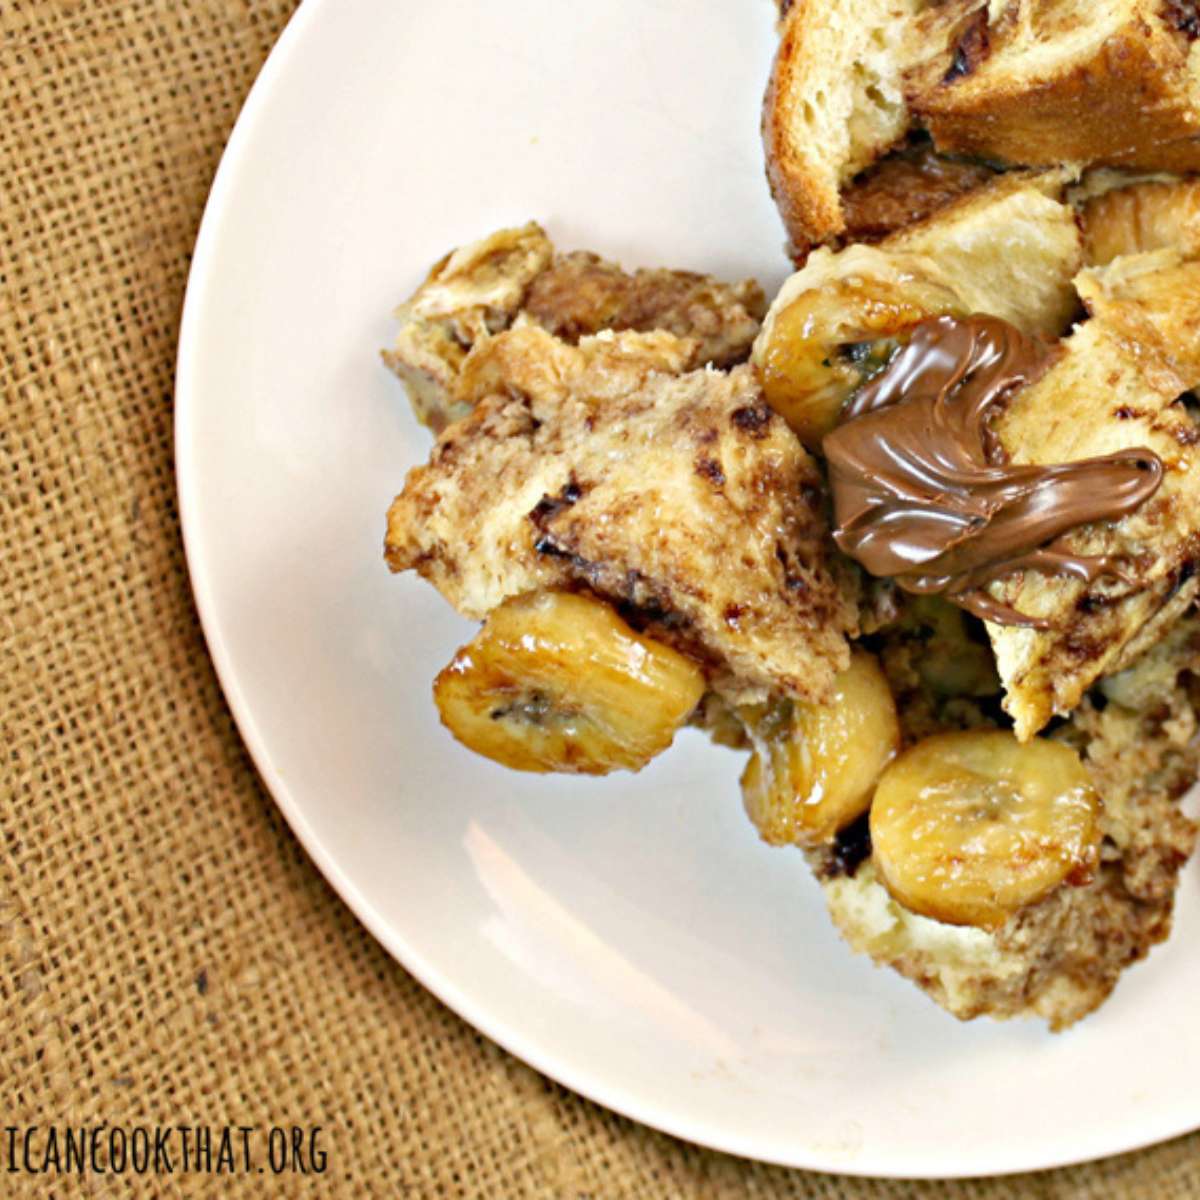 Banana and nutella french toast casserole on a plate.